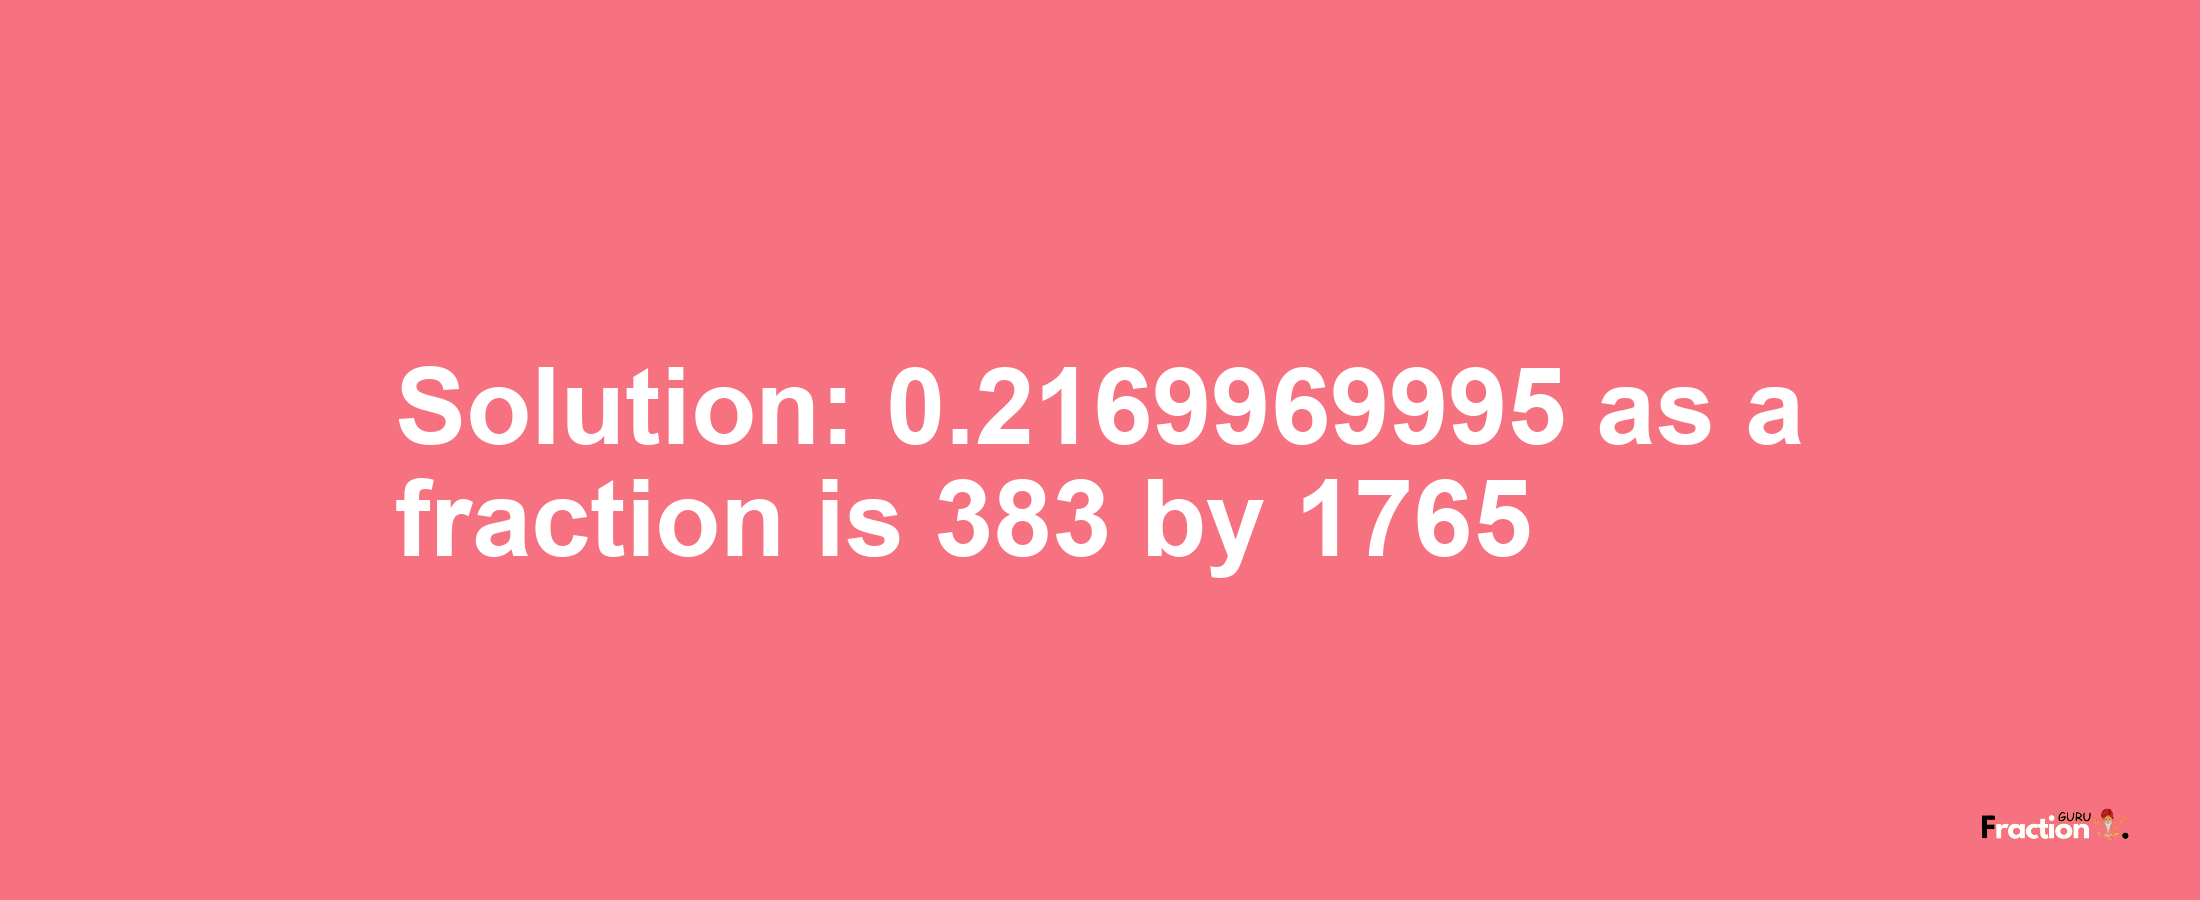 Solution:0.2169969995 as a fraction is 383/1765